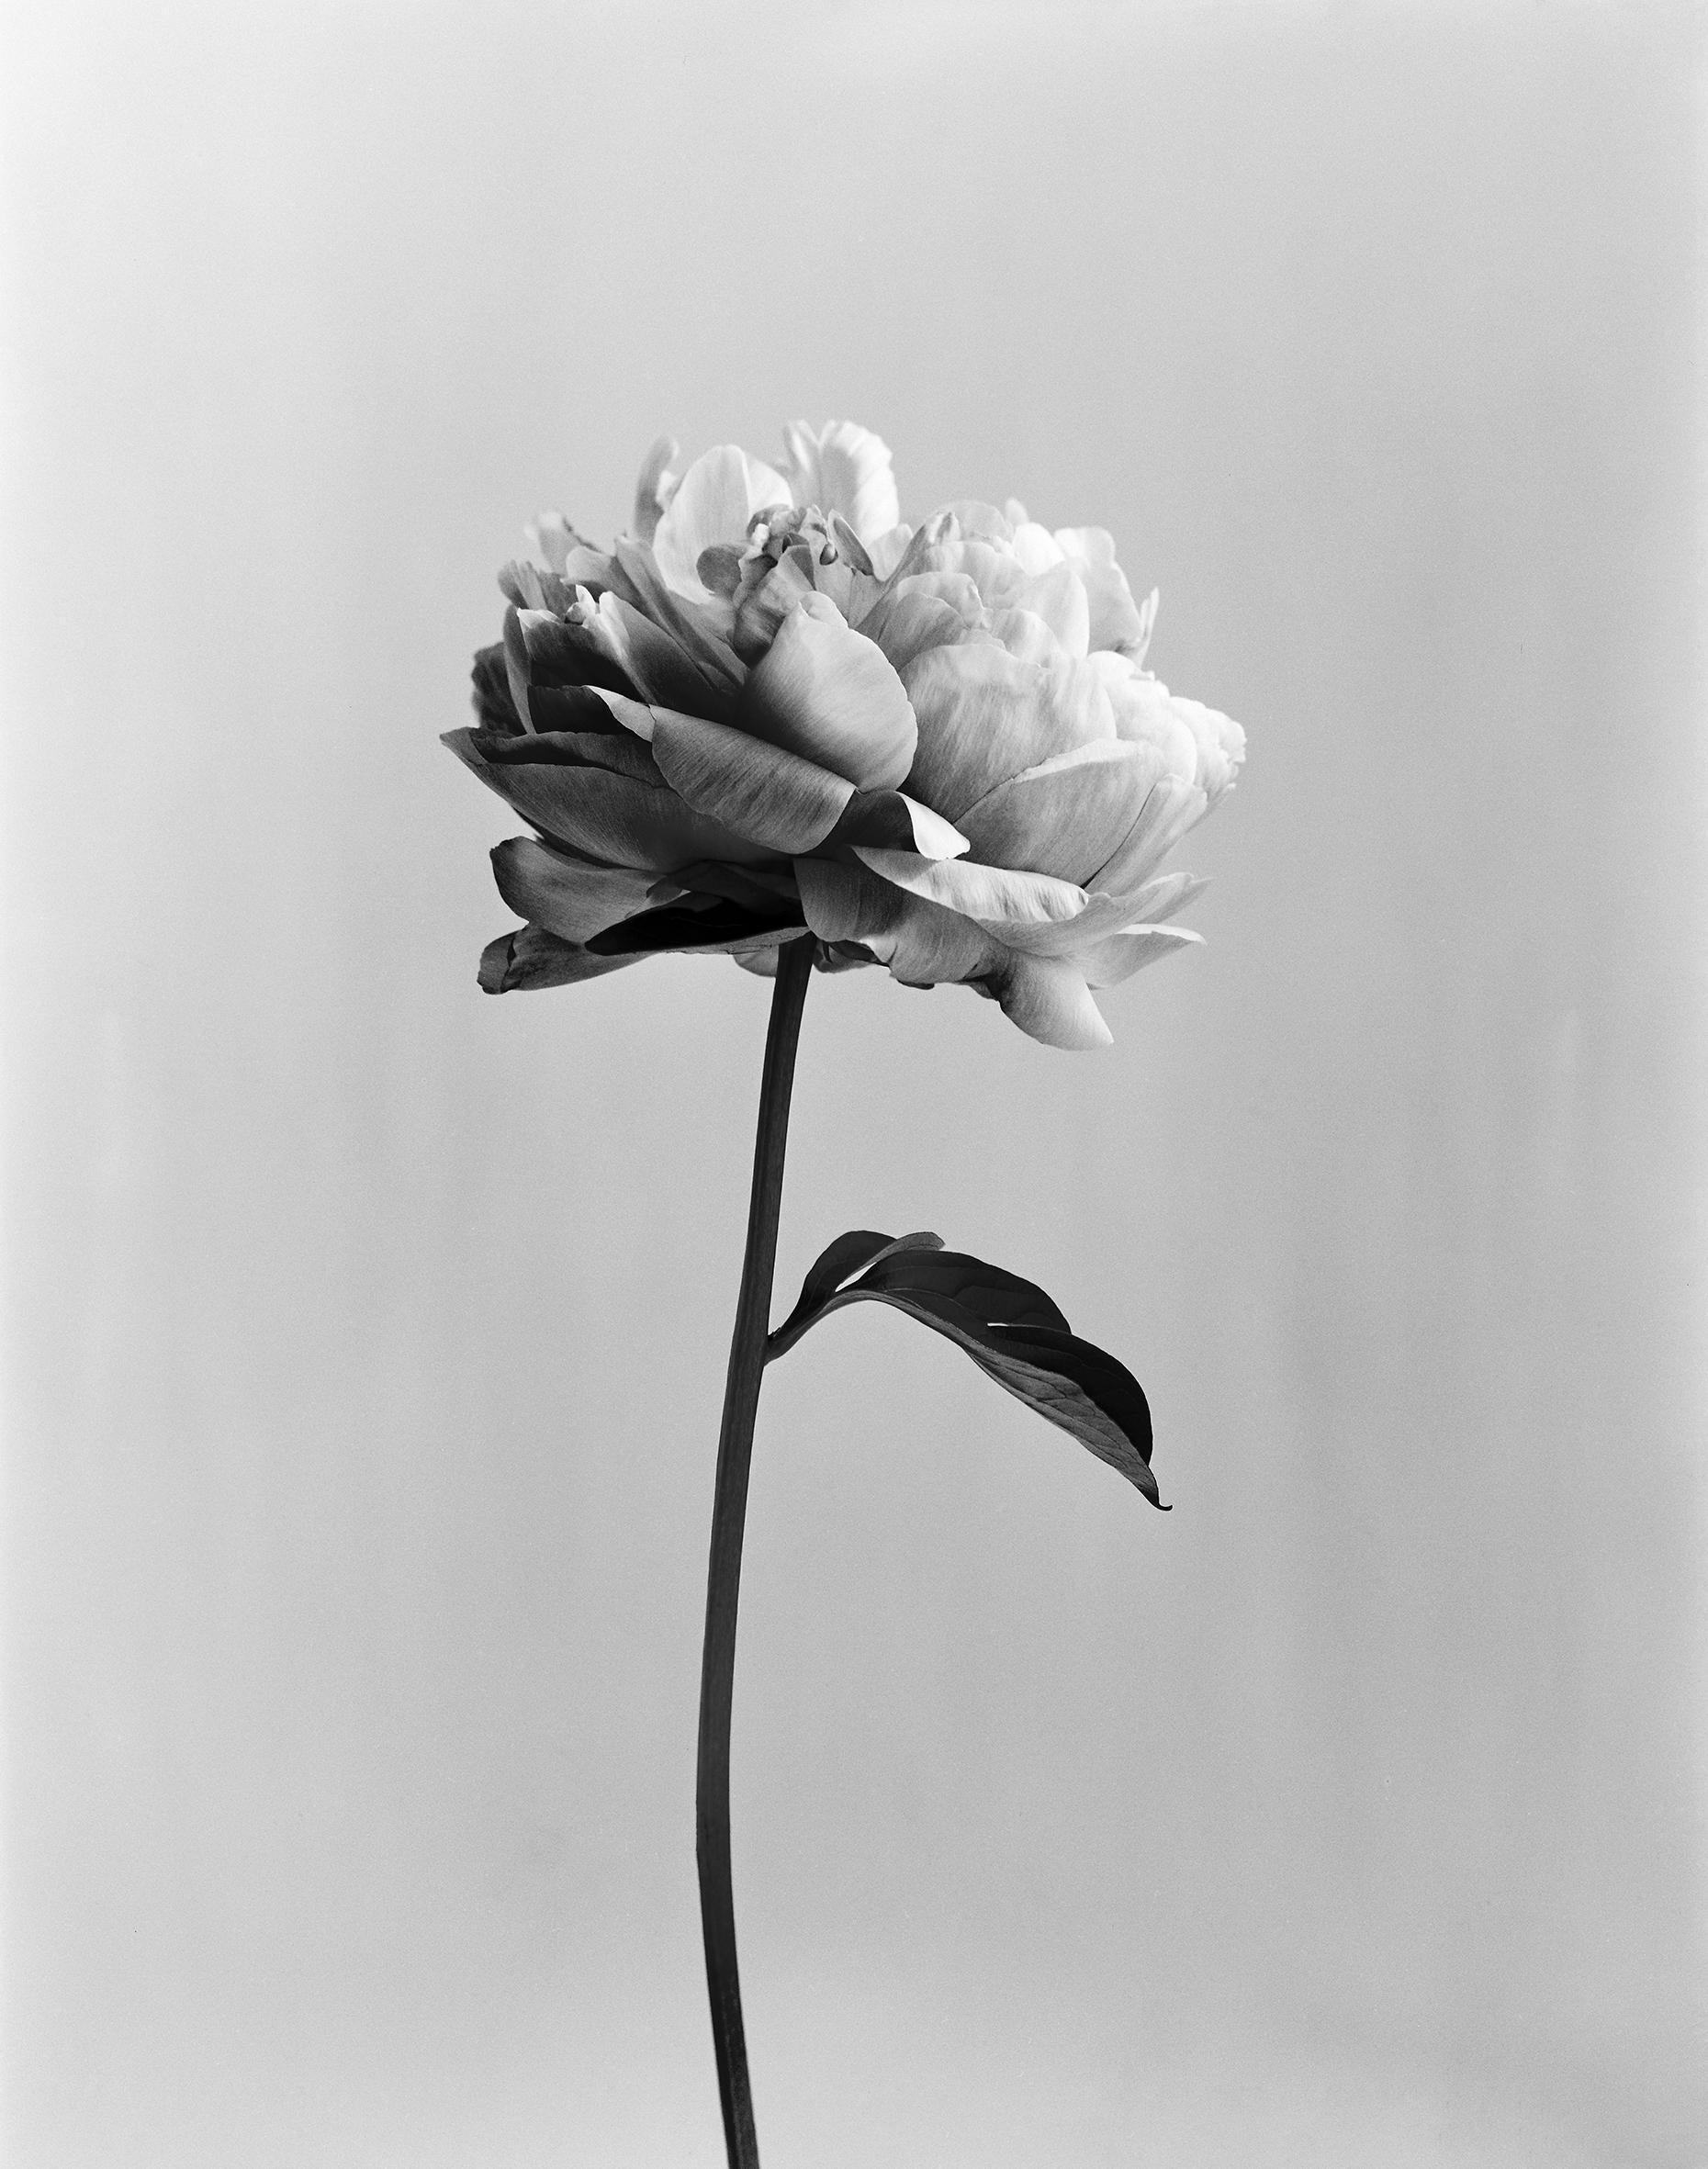 Ugne Pouwell Black and White Photograph - Peony no.3 - analogue black and white floral photography, Limited edition of 20